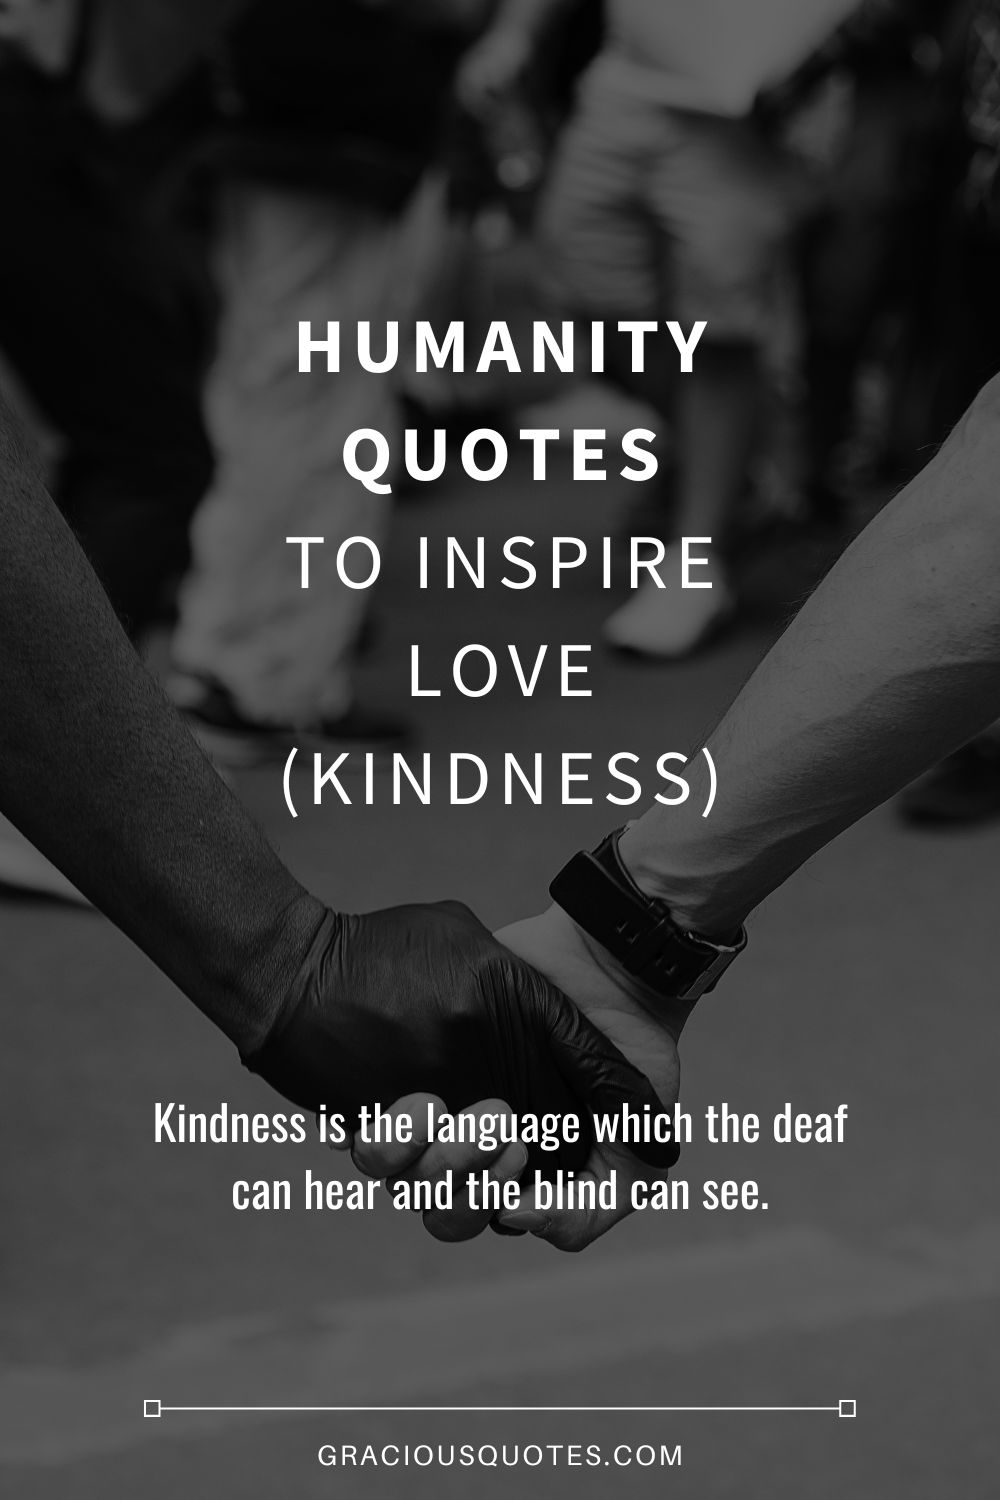 Top 73 Humanity Quotes to Inspire Love (KINDNESS)